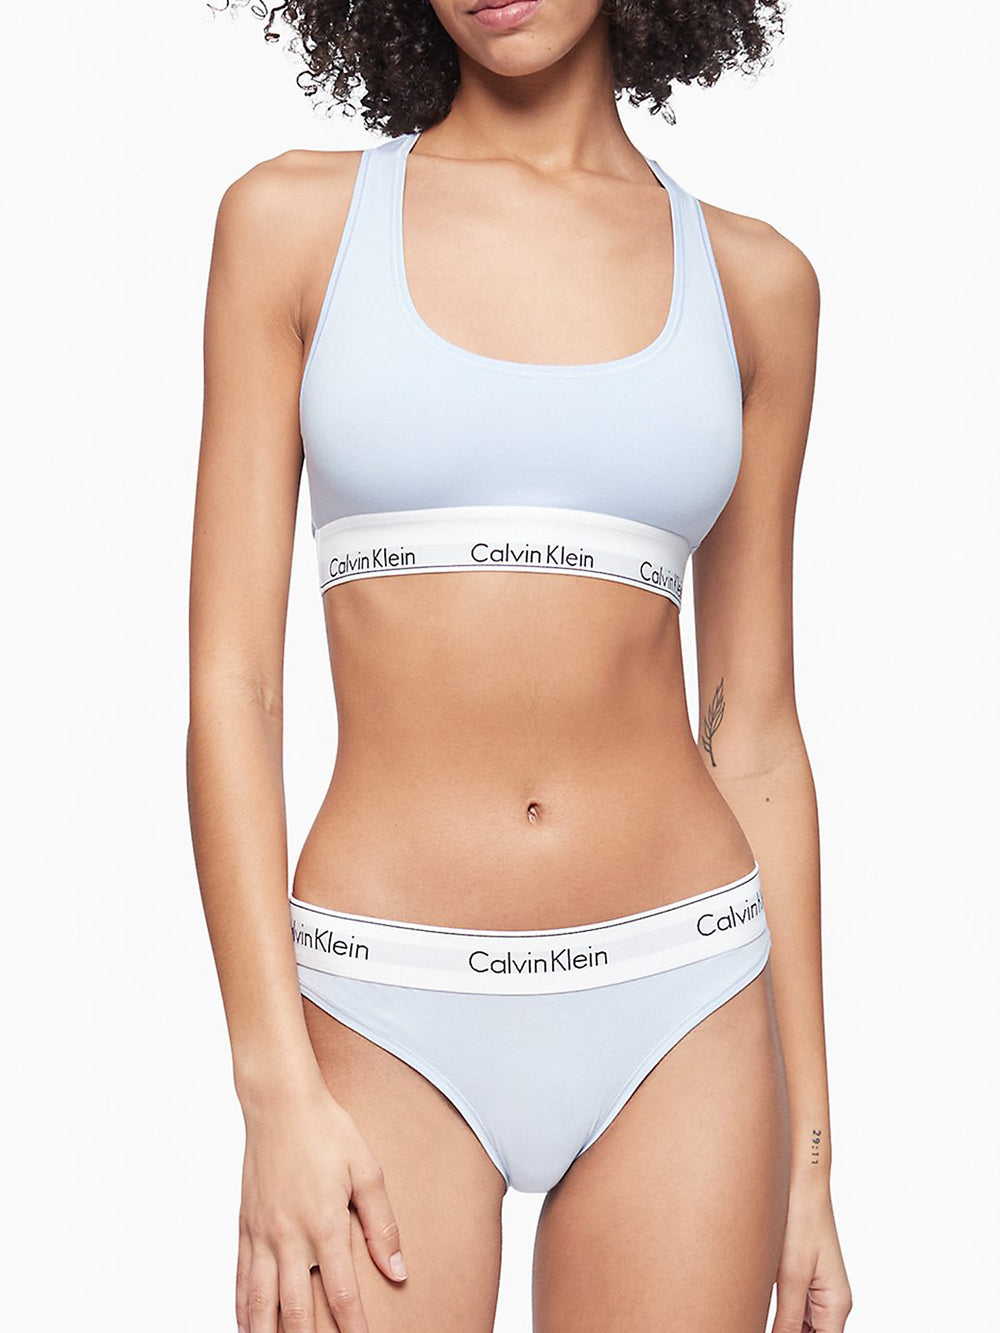 CALVIN KLEIN REIMAGINED HERITAGE UNLINED BRALETTE - CLEARANCE